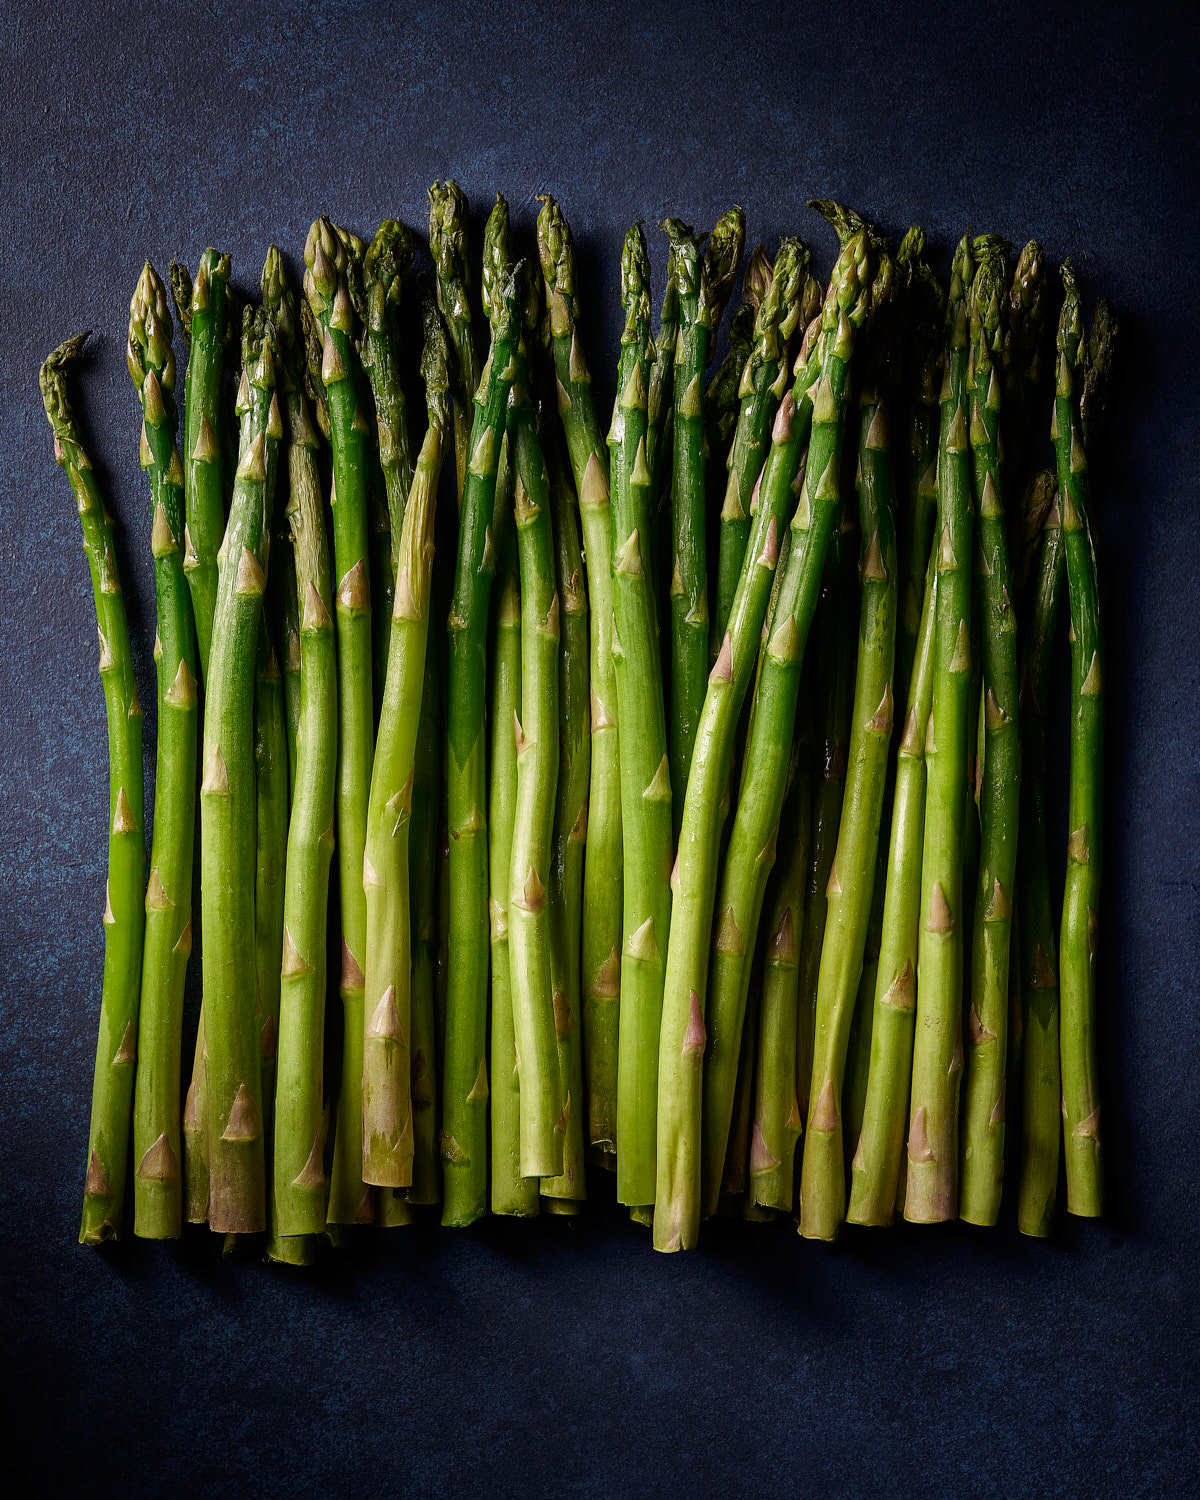 Editorial Still life Food Photography of Asparagus